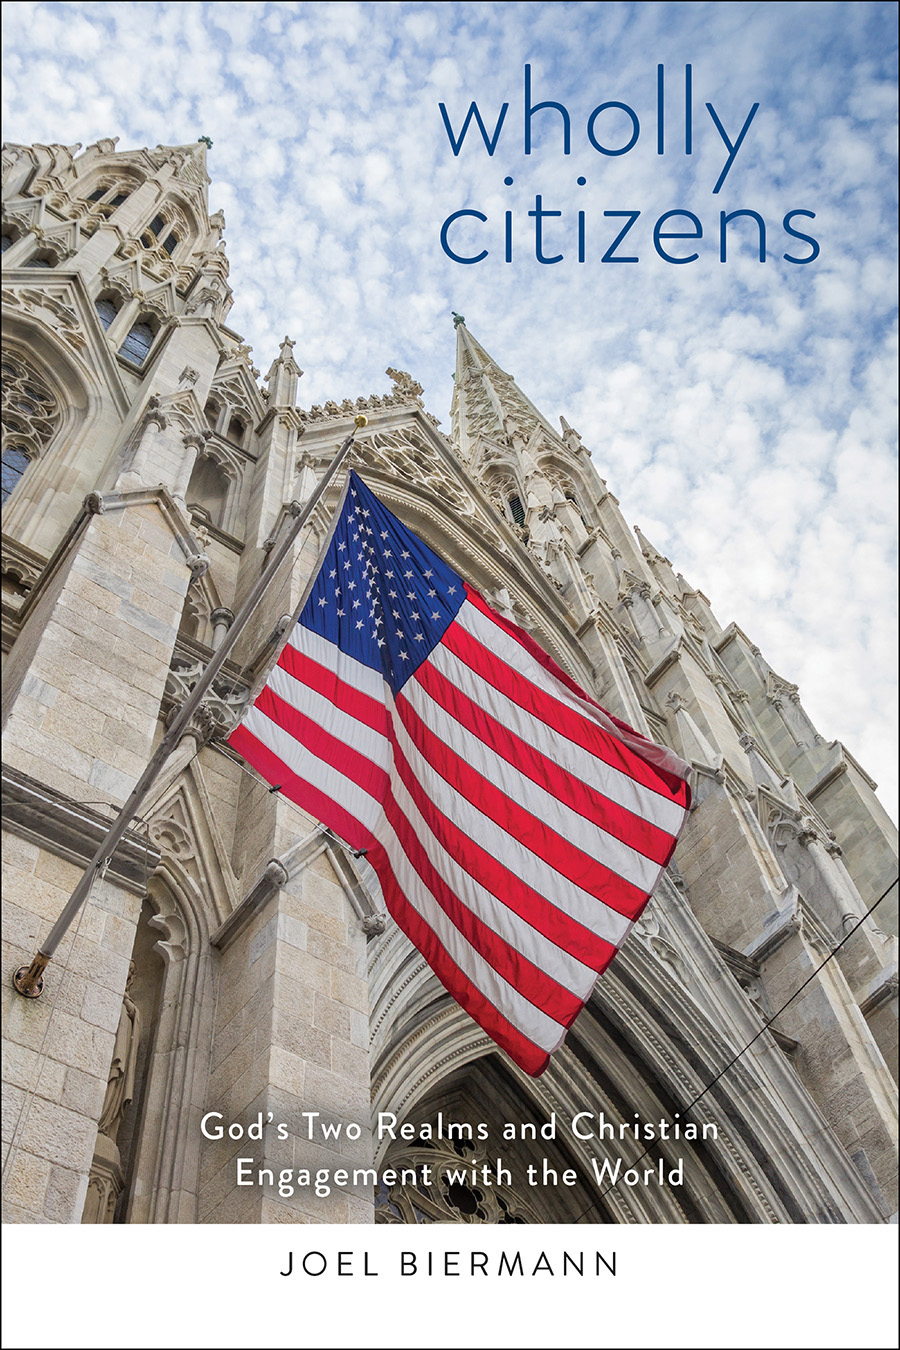 Wholly Citizens: an excerpt from Joel Biermann’s new book